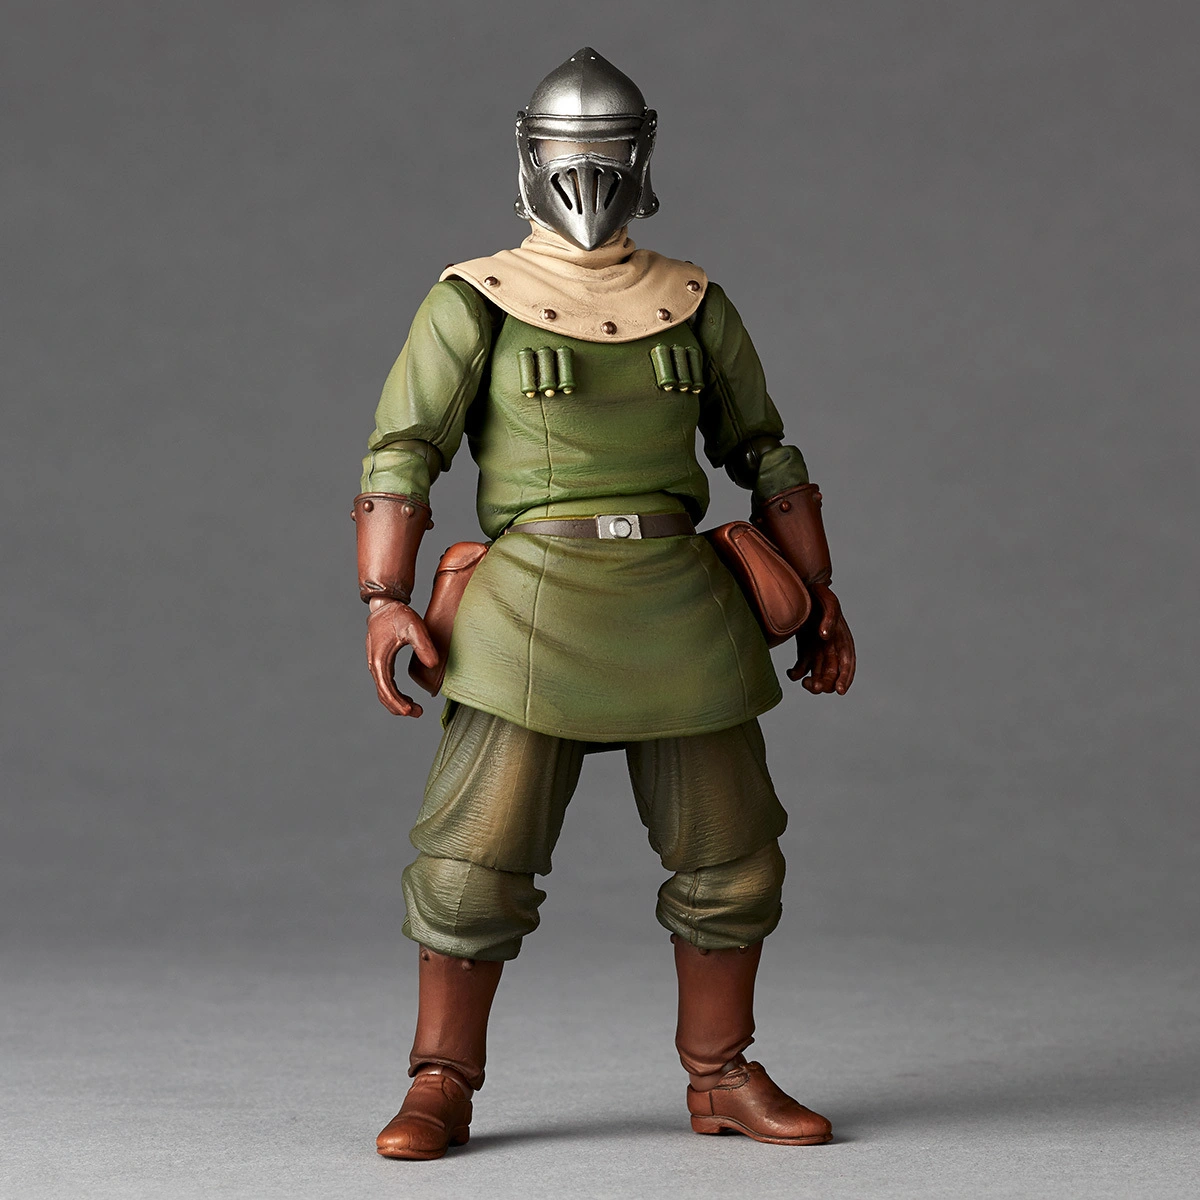 Kaiyodo Releases Detailed Action Figures of Ghibli's Nausicaa Soldiers